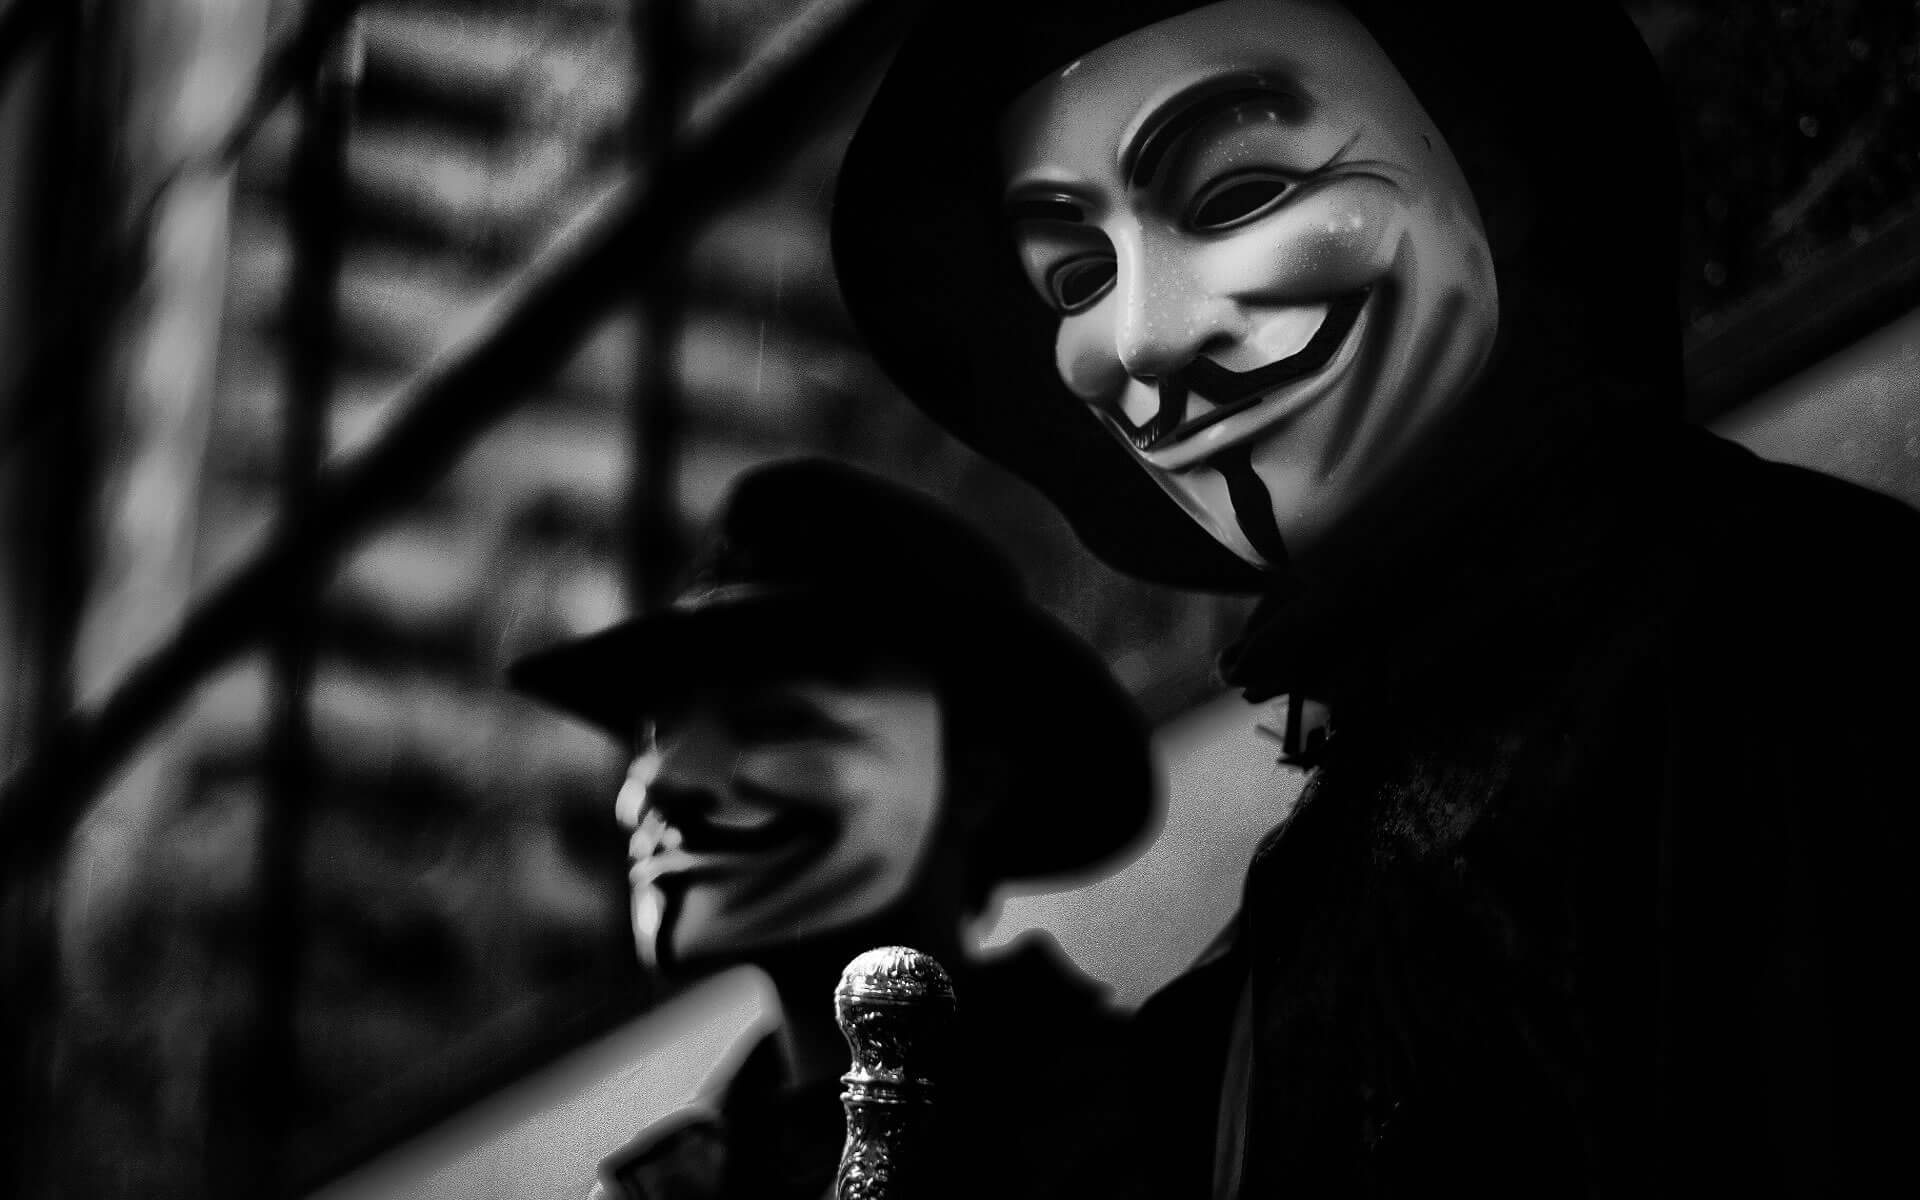 Anonymous took the hacktivism community with them when they died